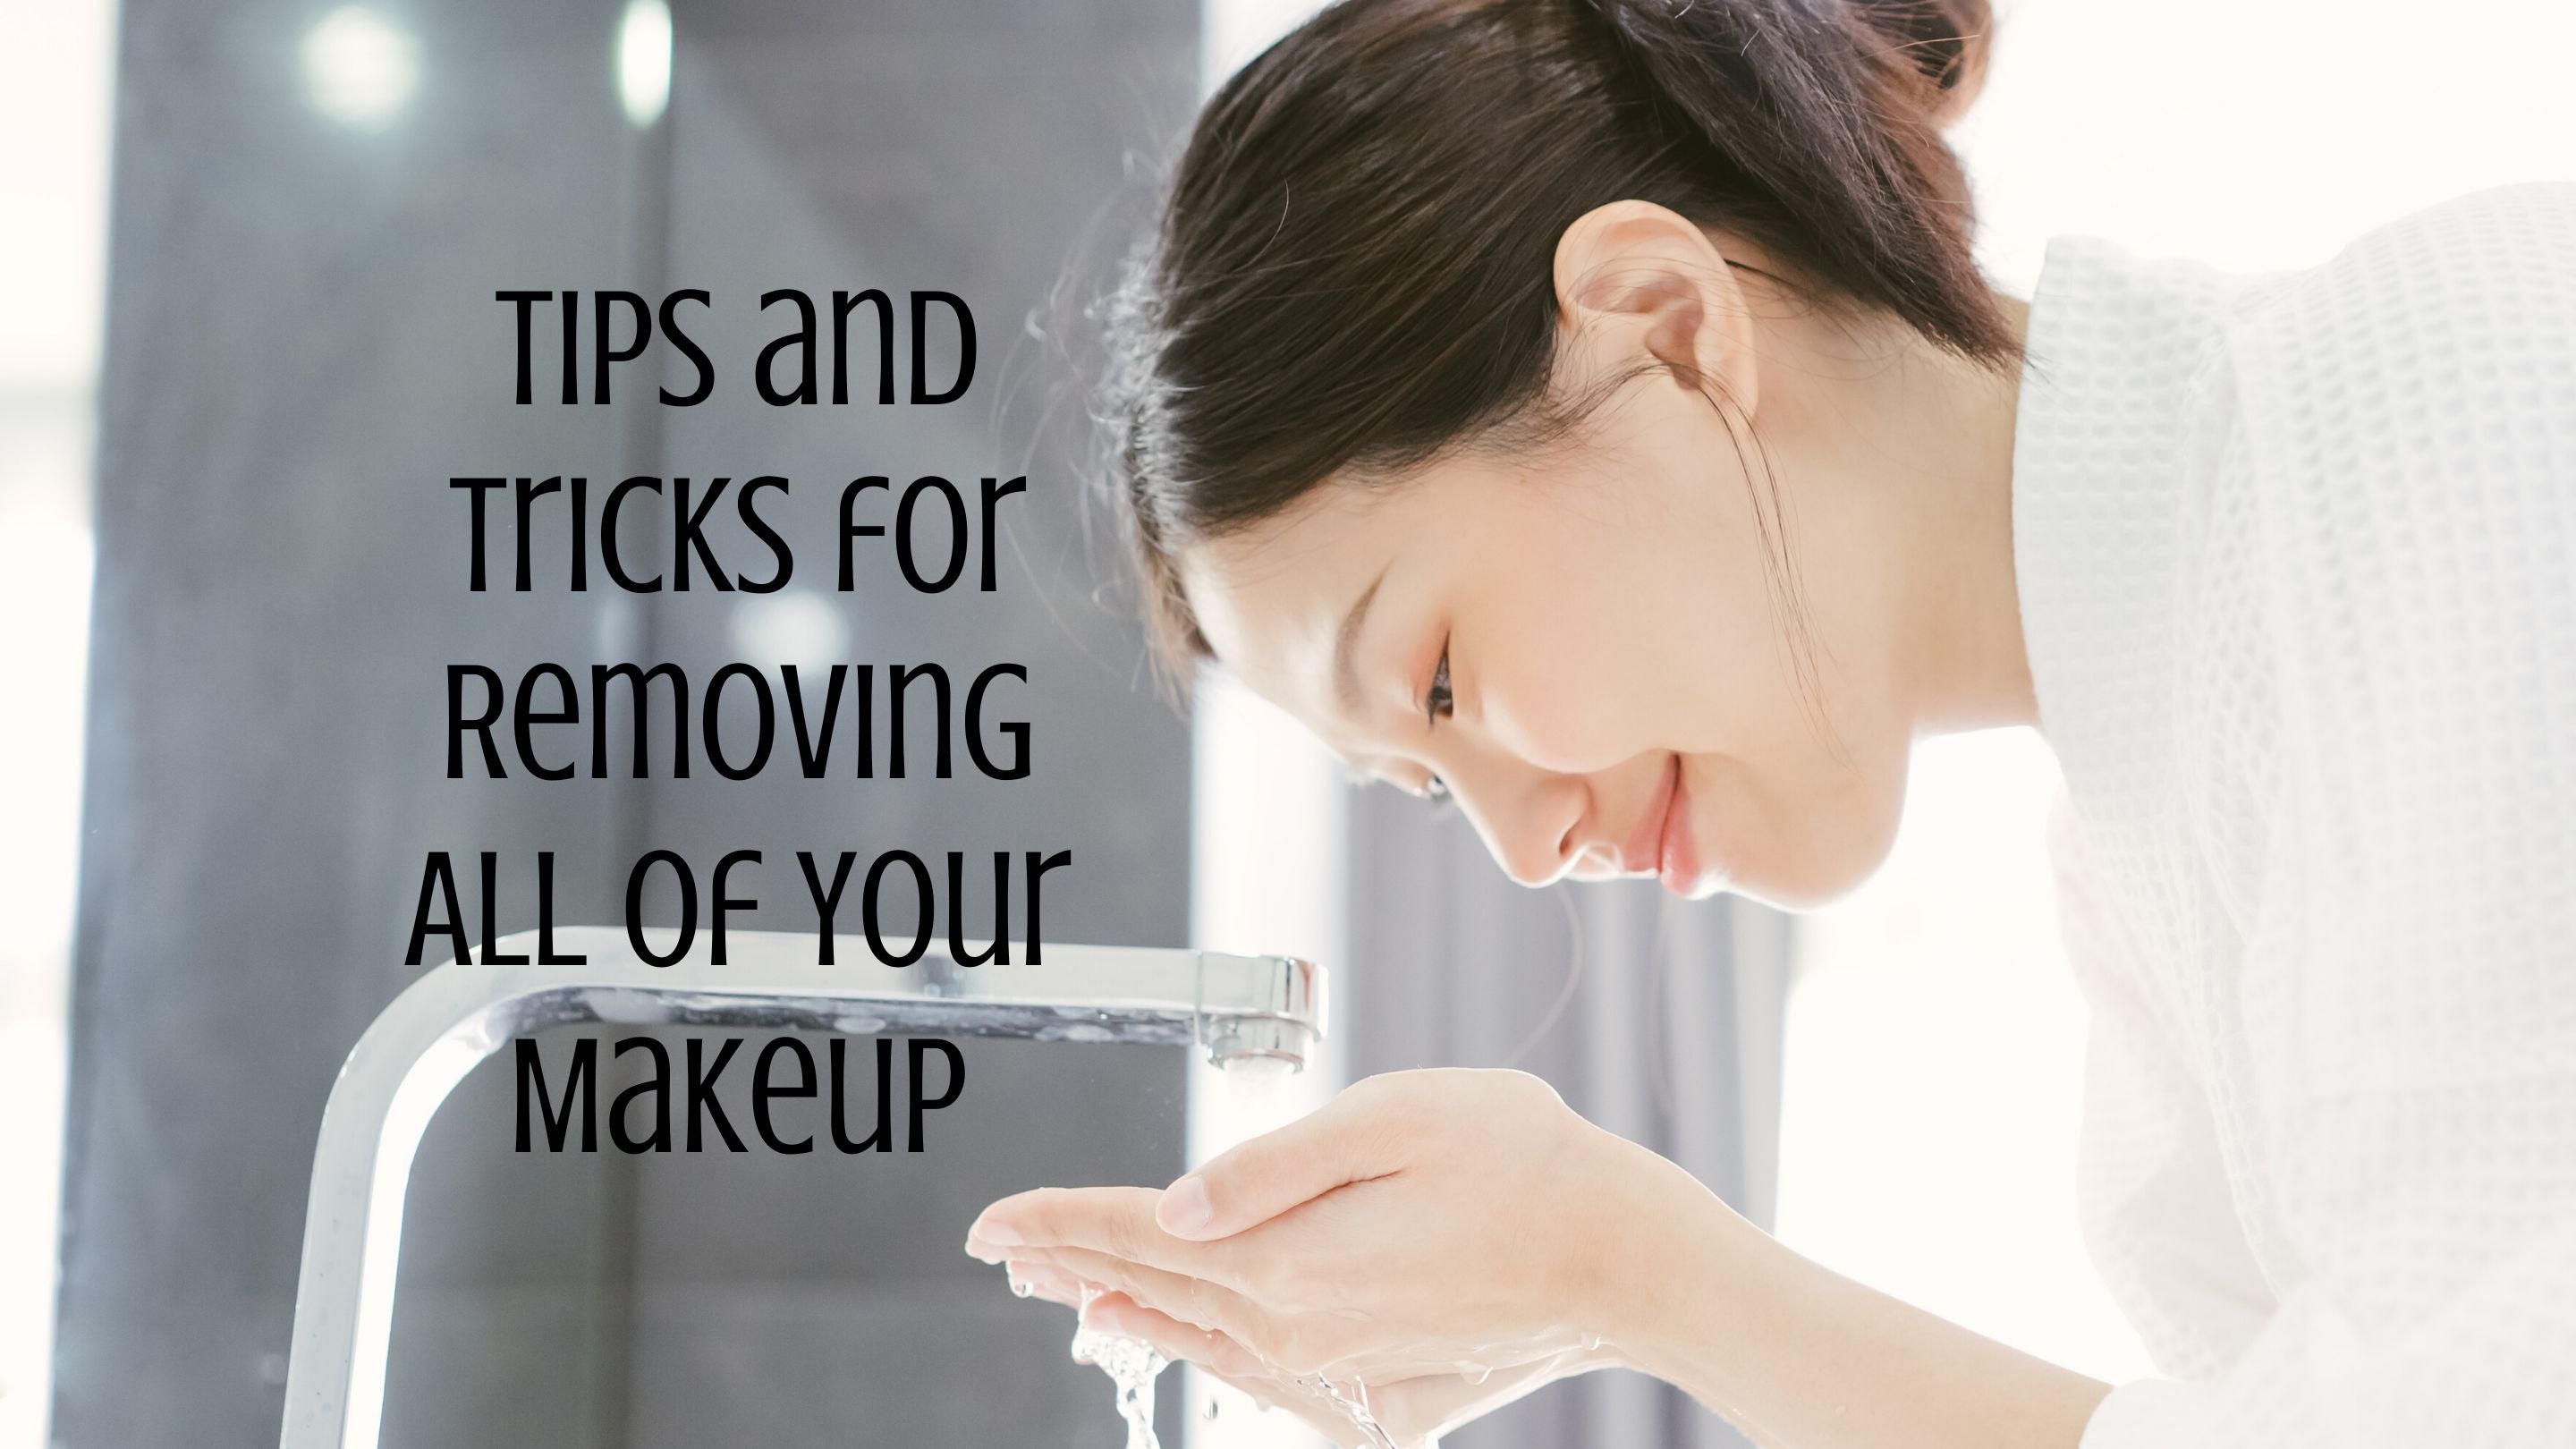 Wash Your Face: Tips and Tricks for Removing ALL of Your Makeup